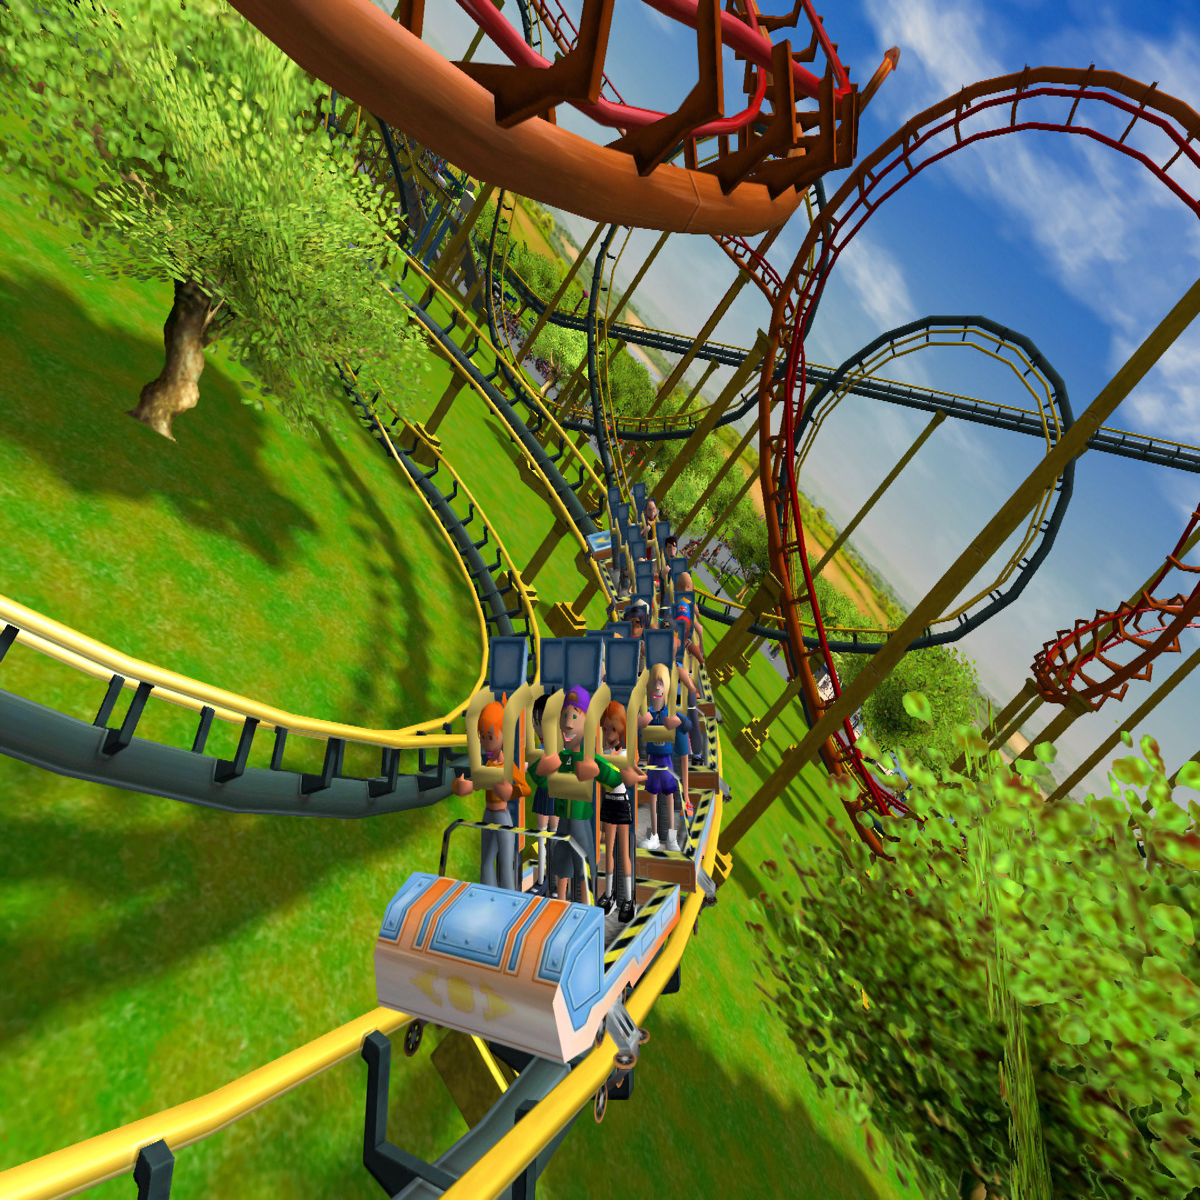 RollerCoaster Tycoon 3 Review